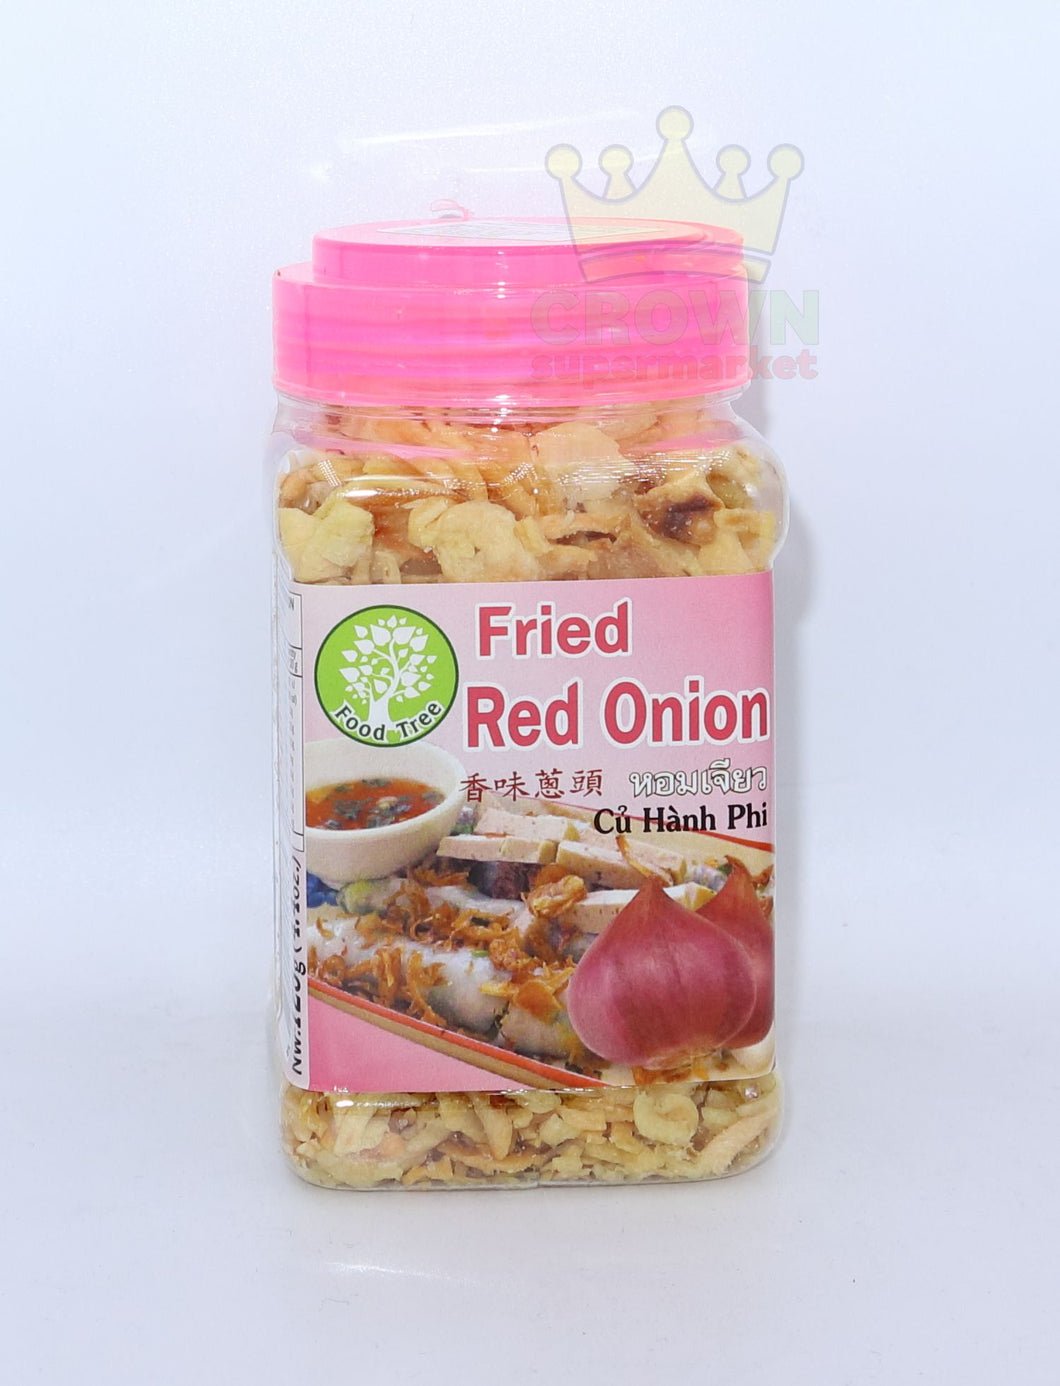 Food Tree Fried Red Onion 125g - Crown Supermarket